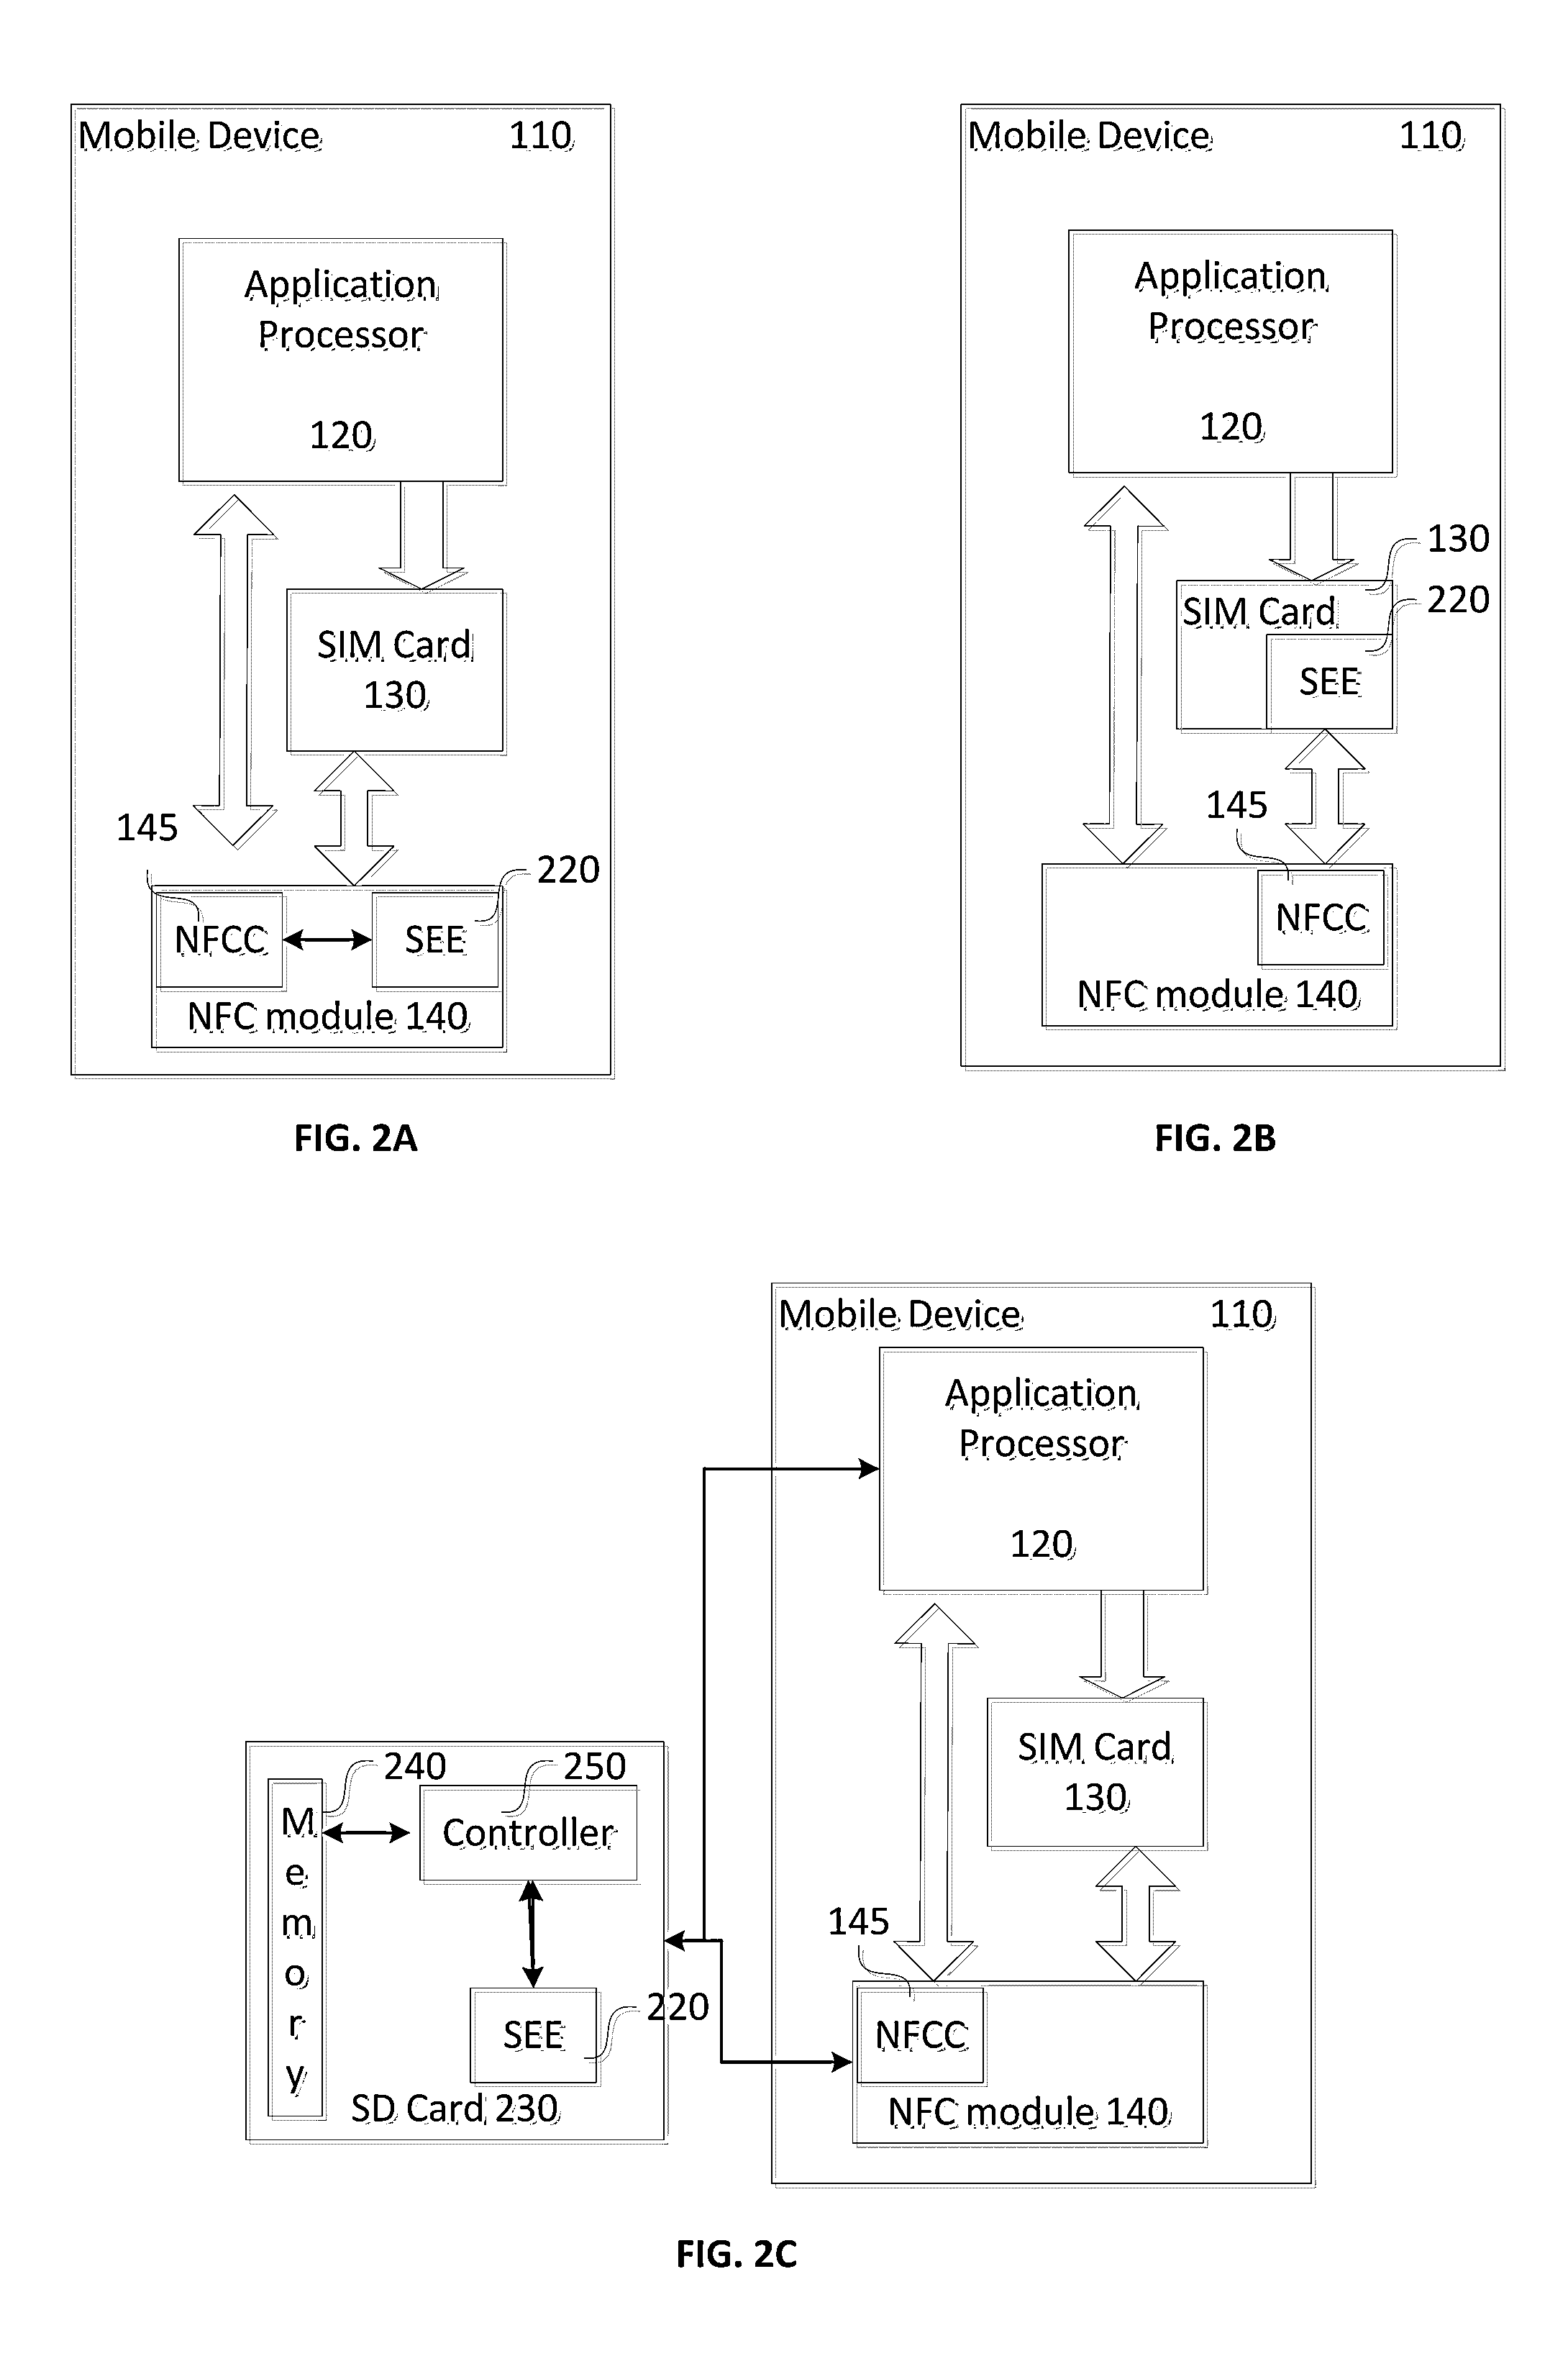 Methods for providing Anti-rollback protection of a firmware version in a device which has no internal non-volatile memory